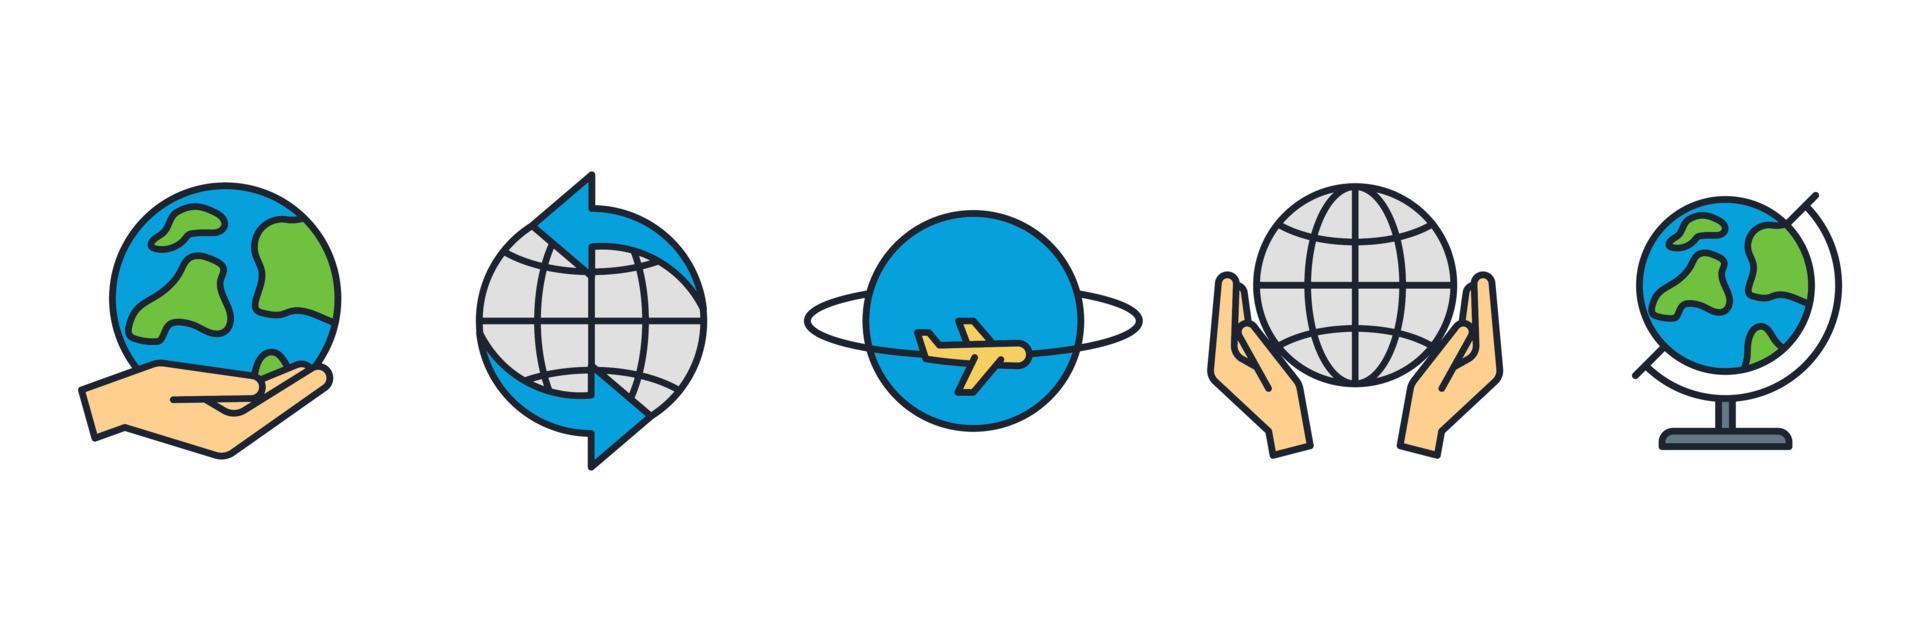 globe set icon symbol template for graphic and web design collection logo vector illustration